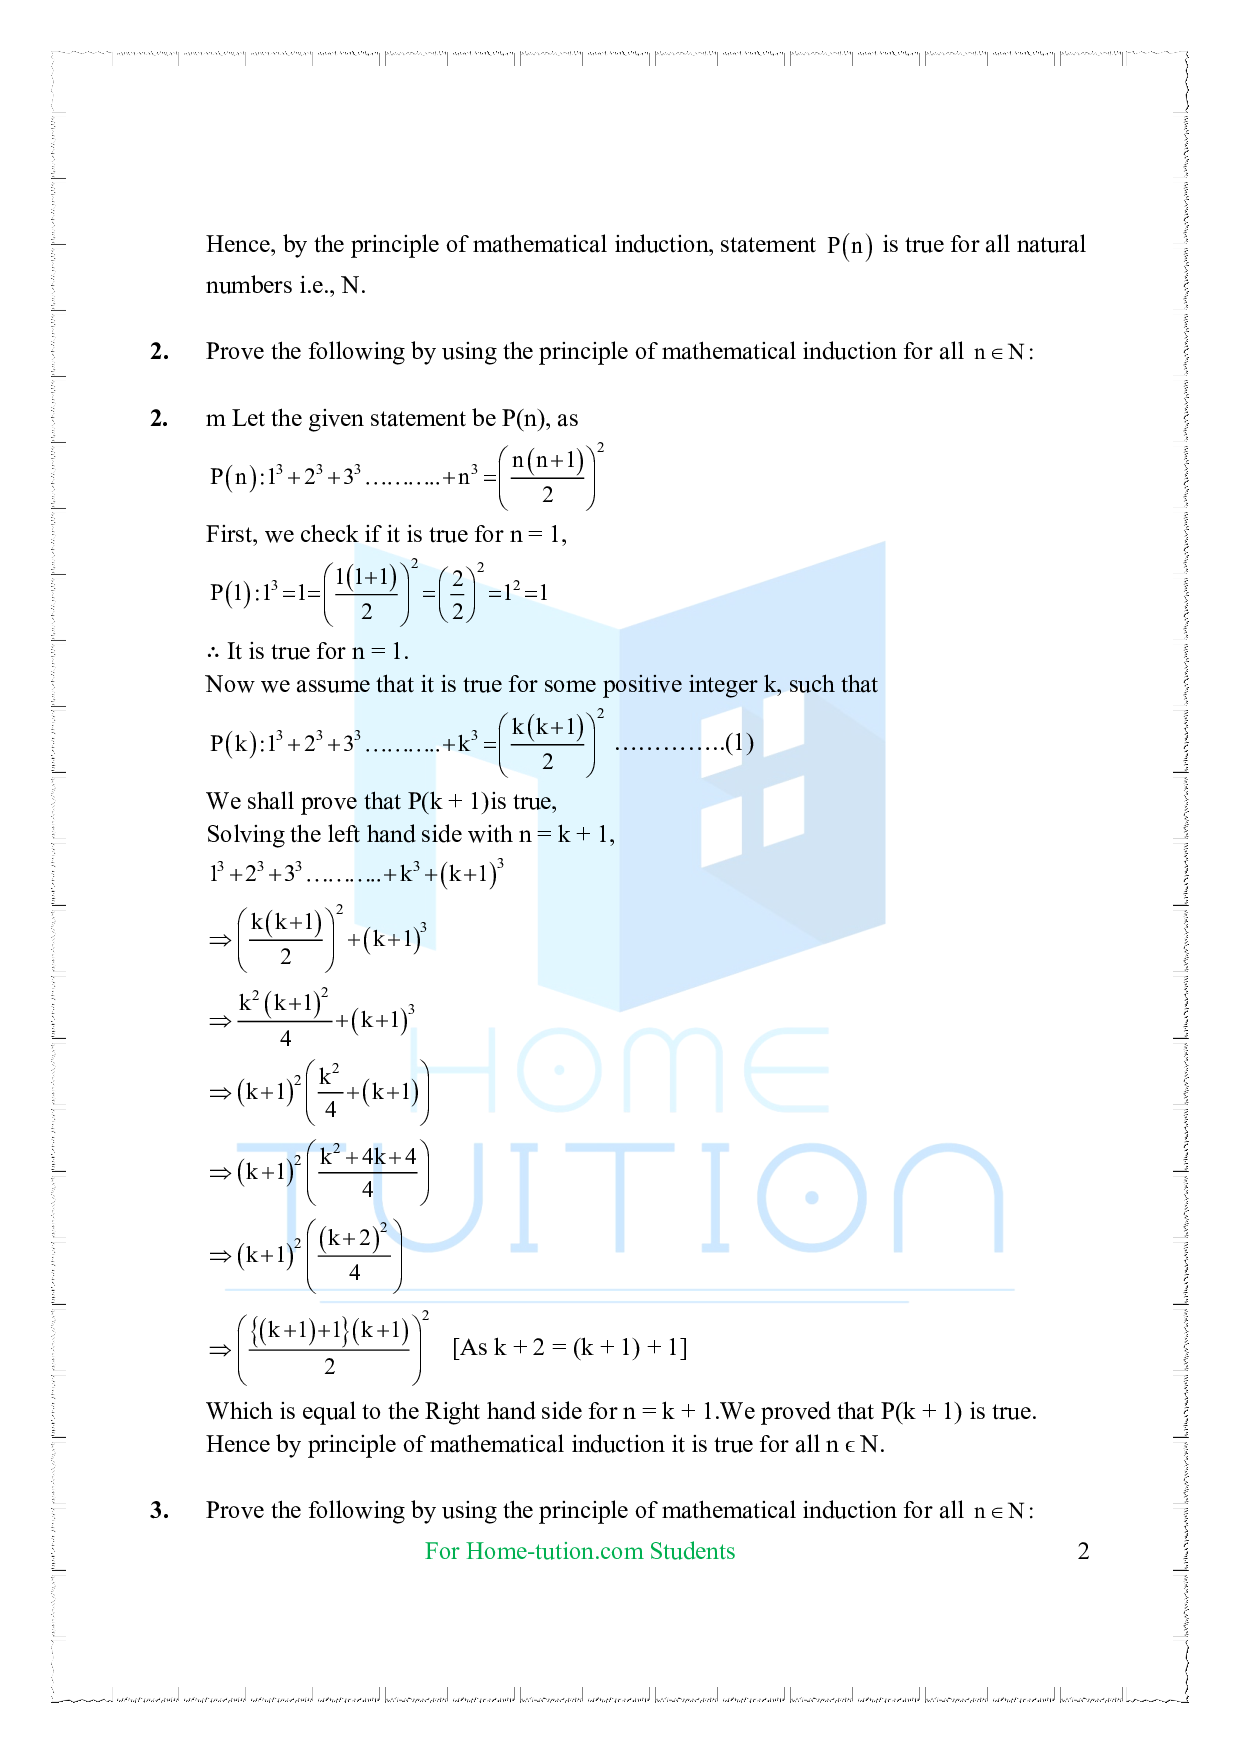 Chapter 4 Principle of Mathematical Induction